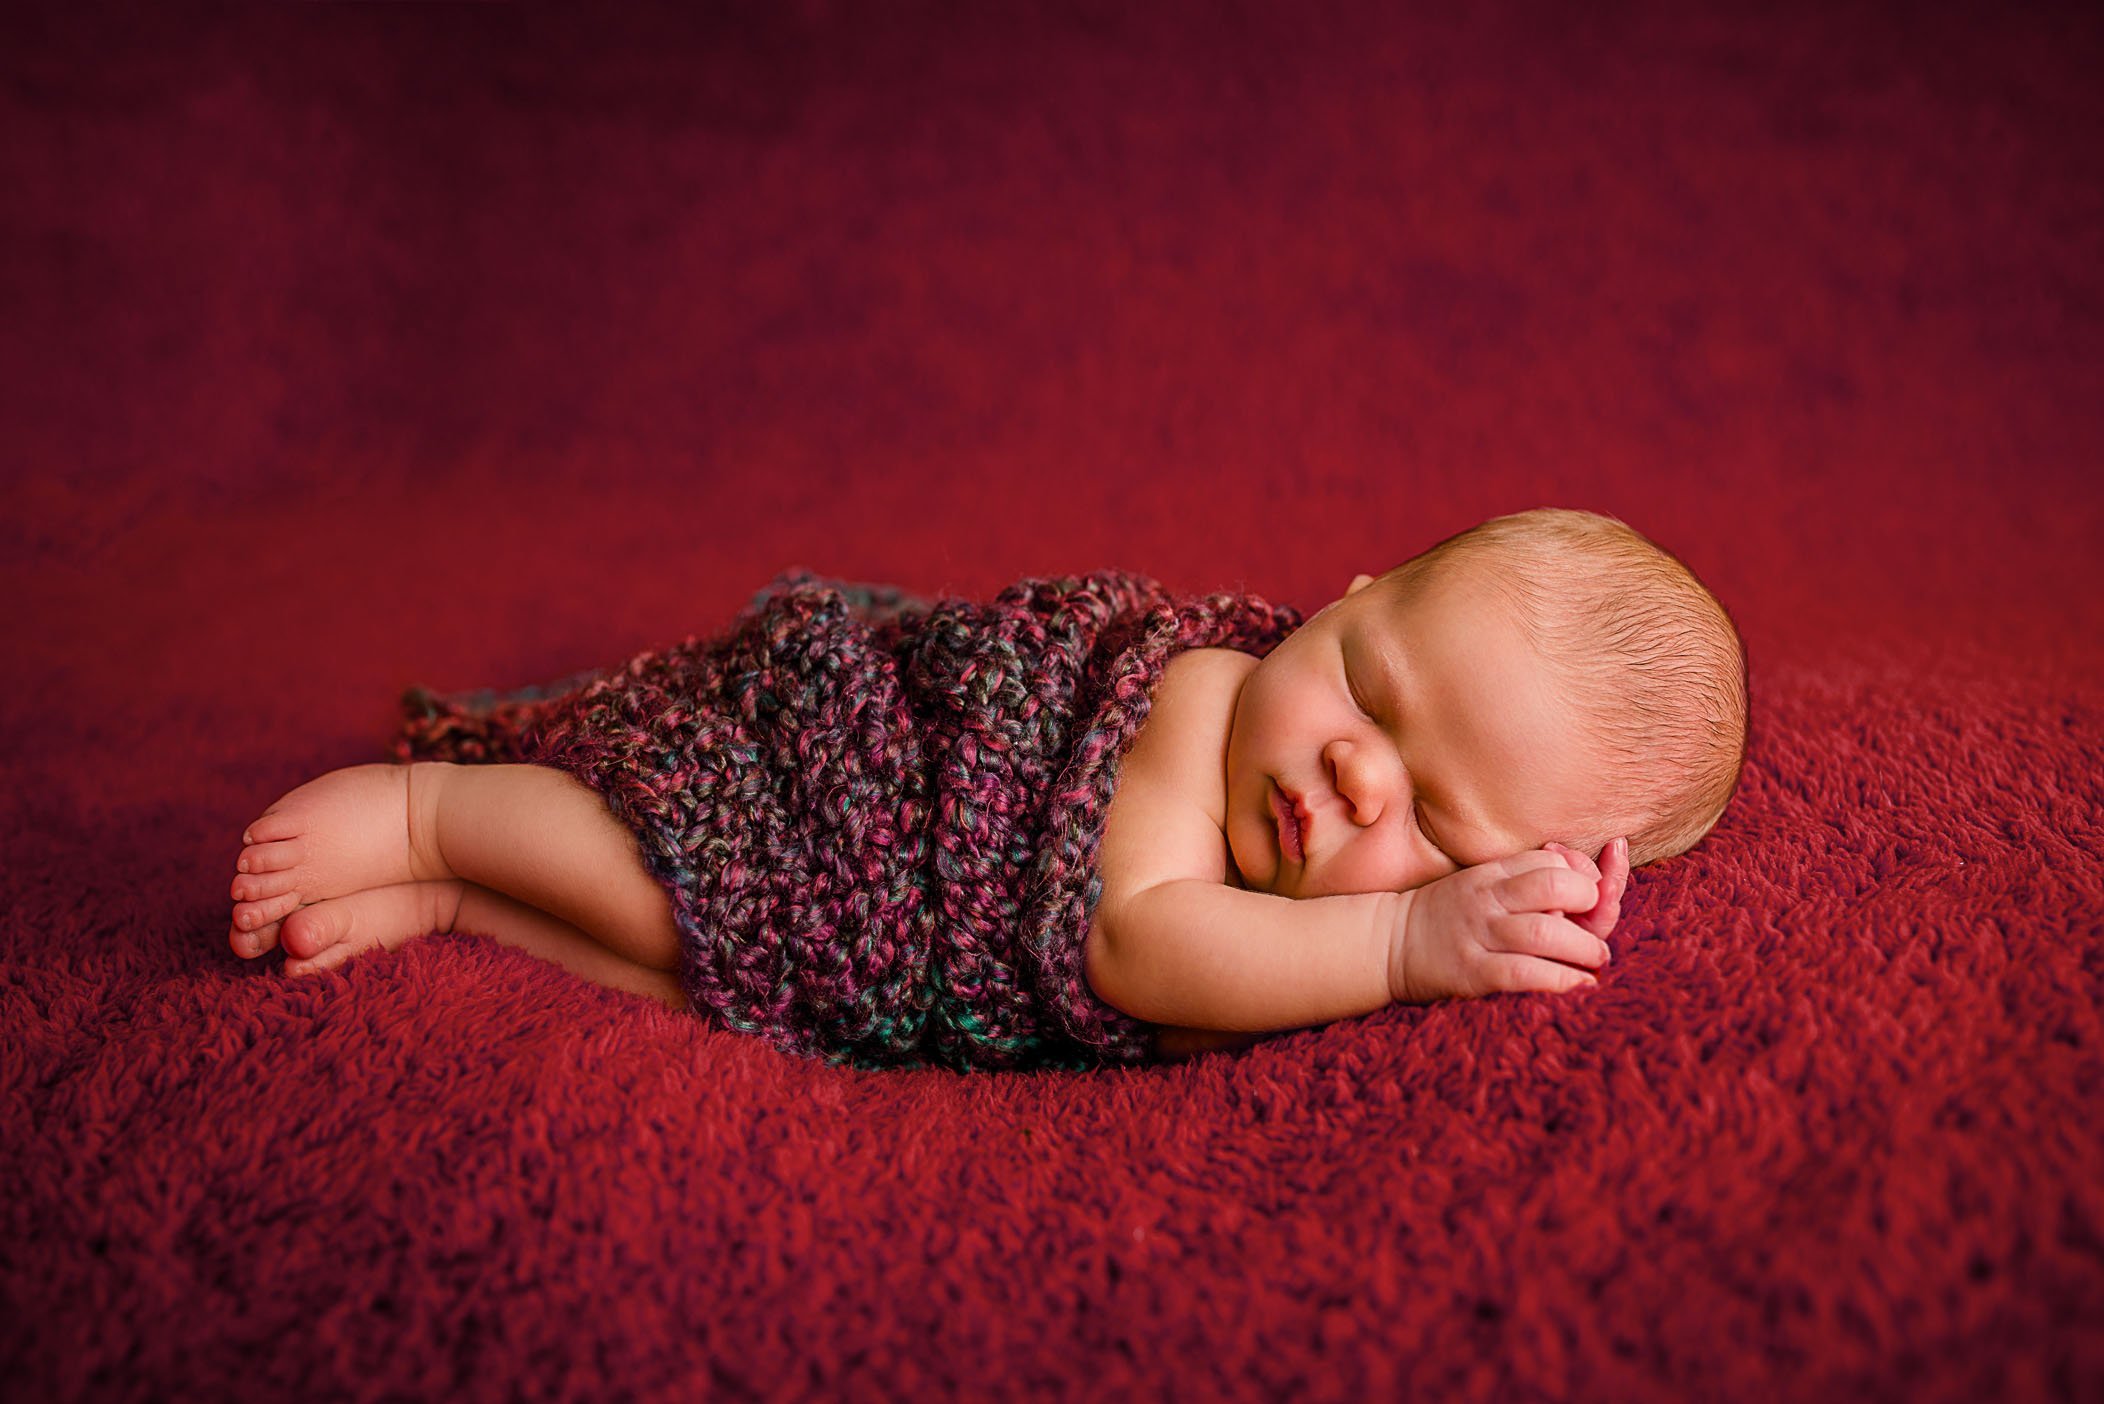 newborn baby sleeping on side on deep red blanket with knitted wrap over her